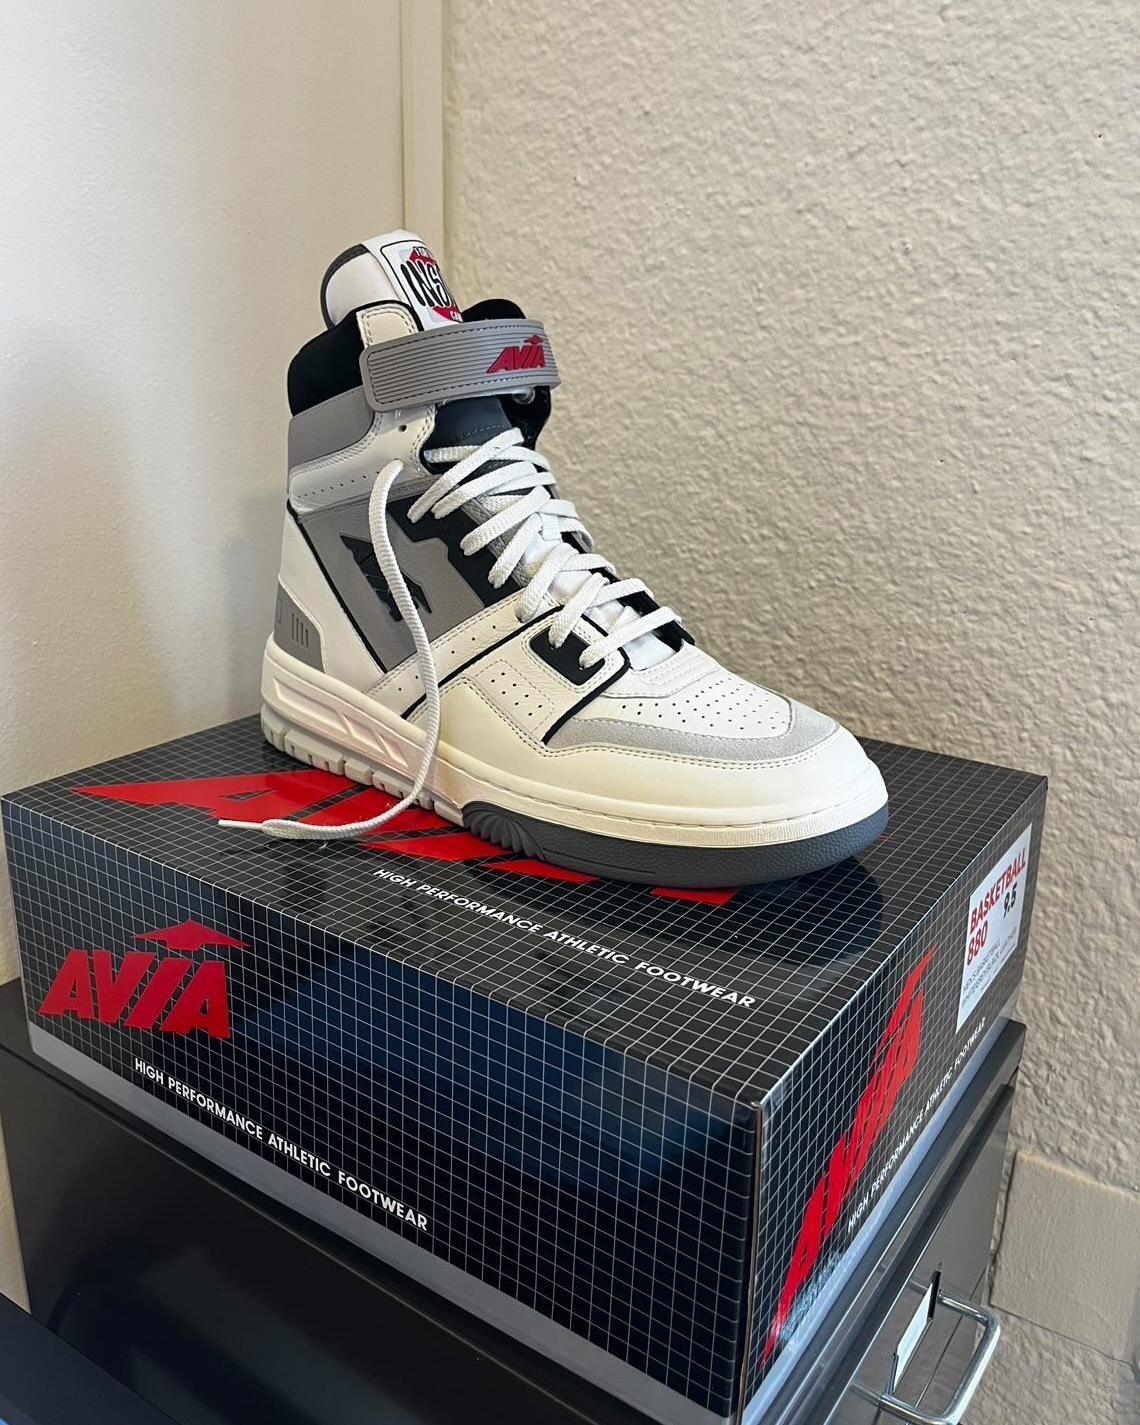 Revived 80s-Style Sneakers : AVIA 830 and 880 high-tops